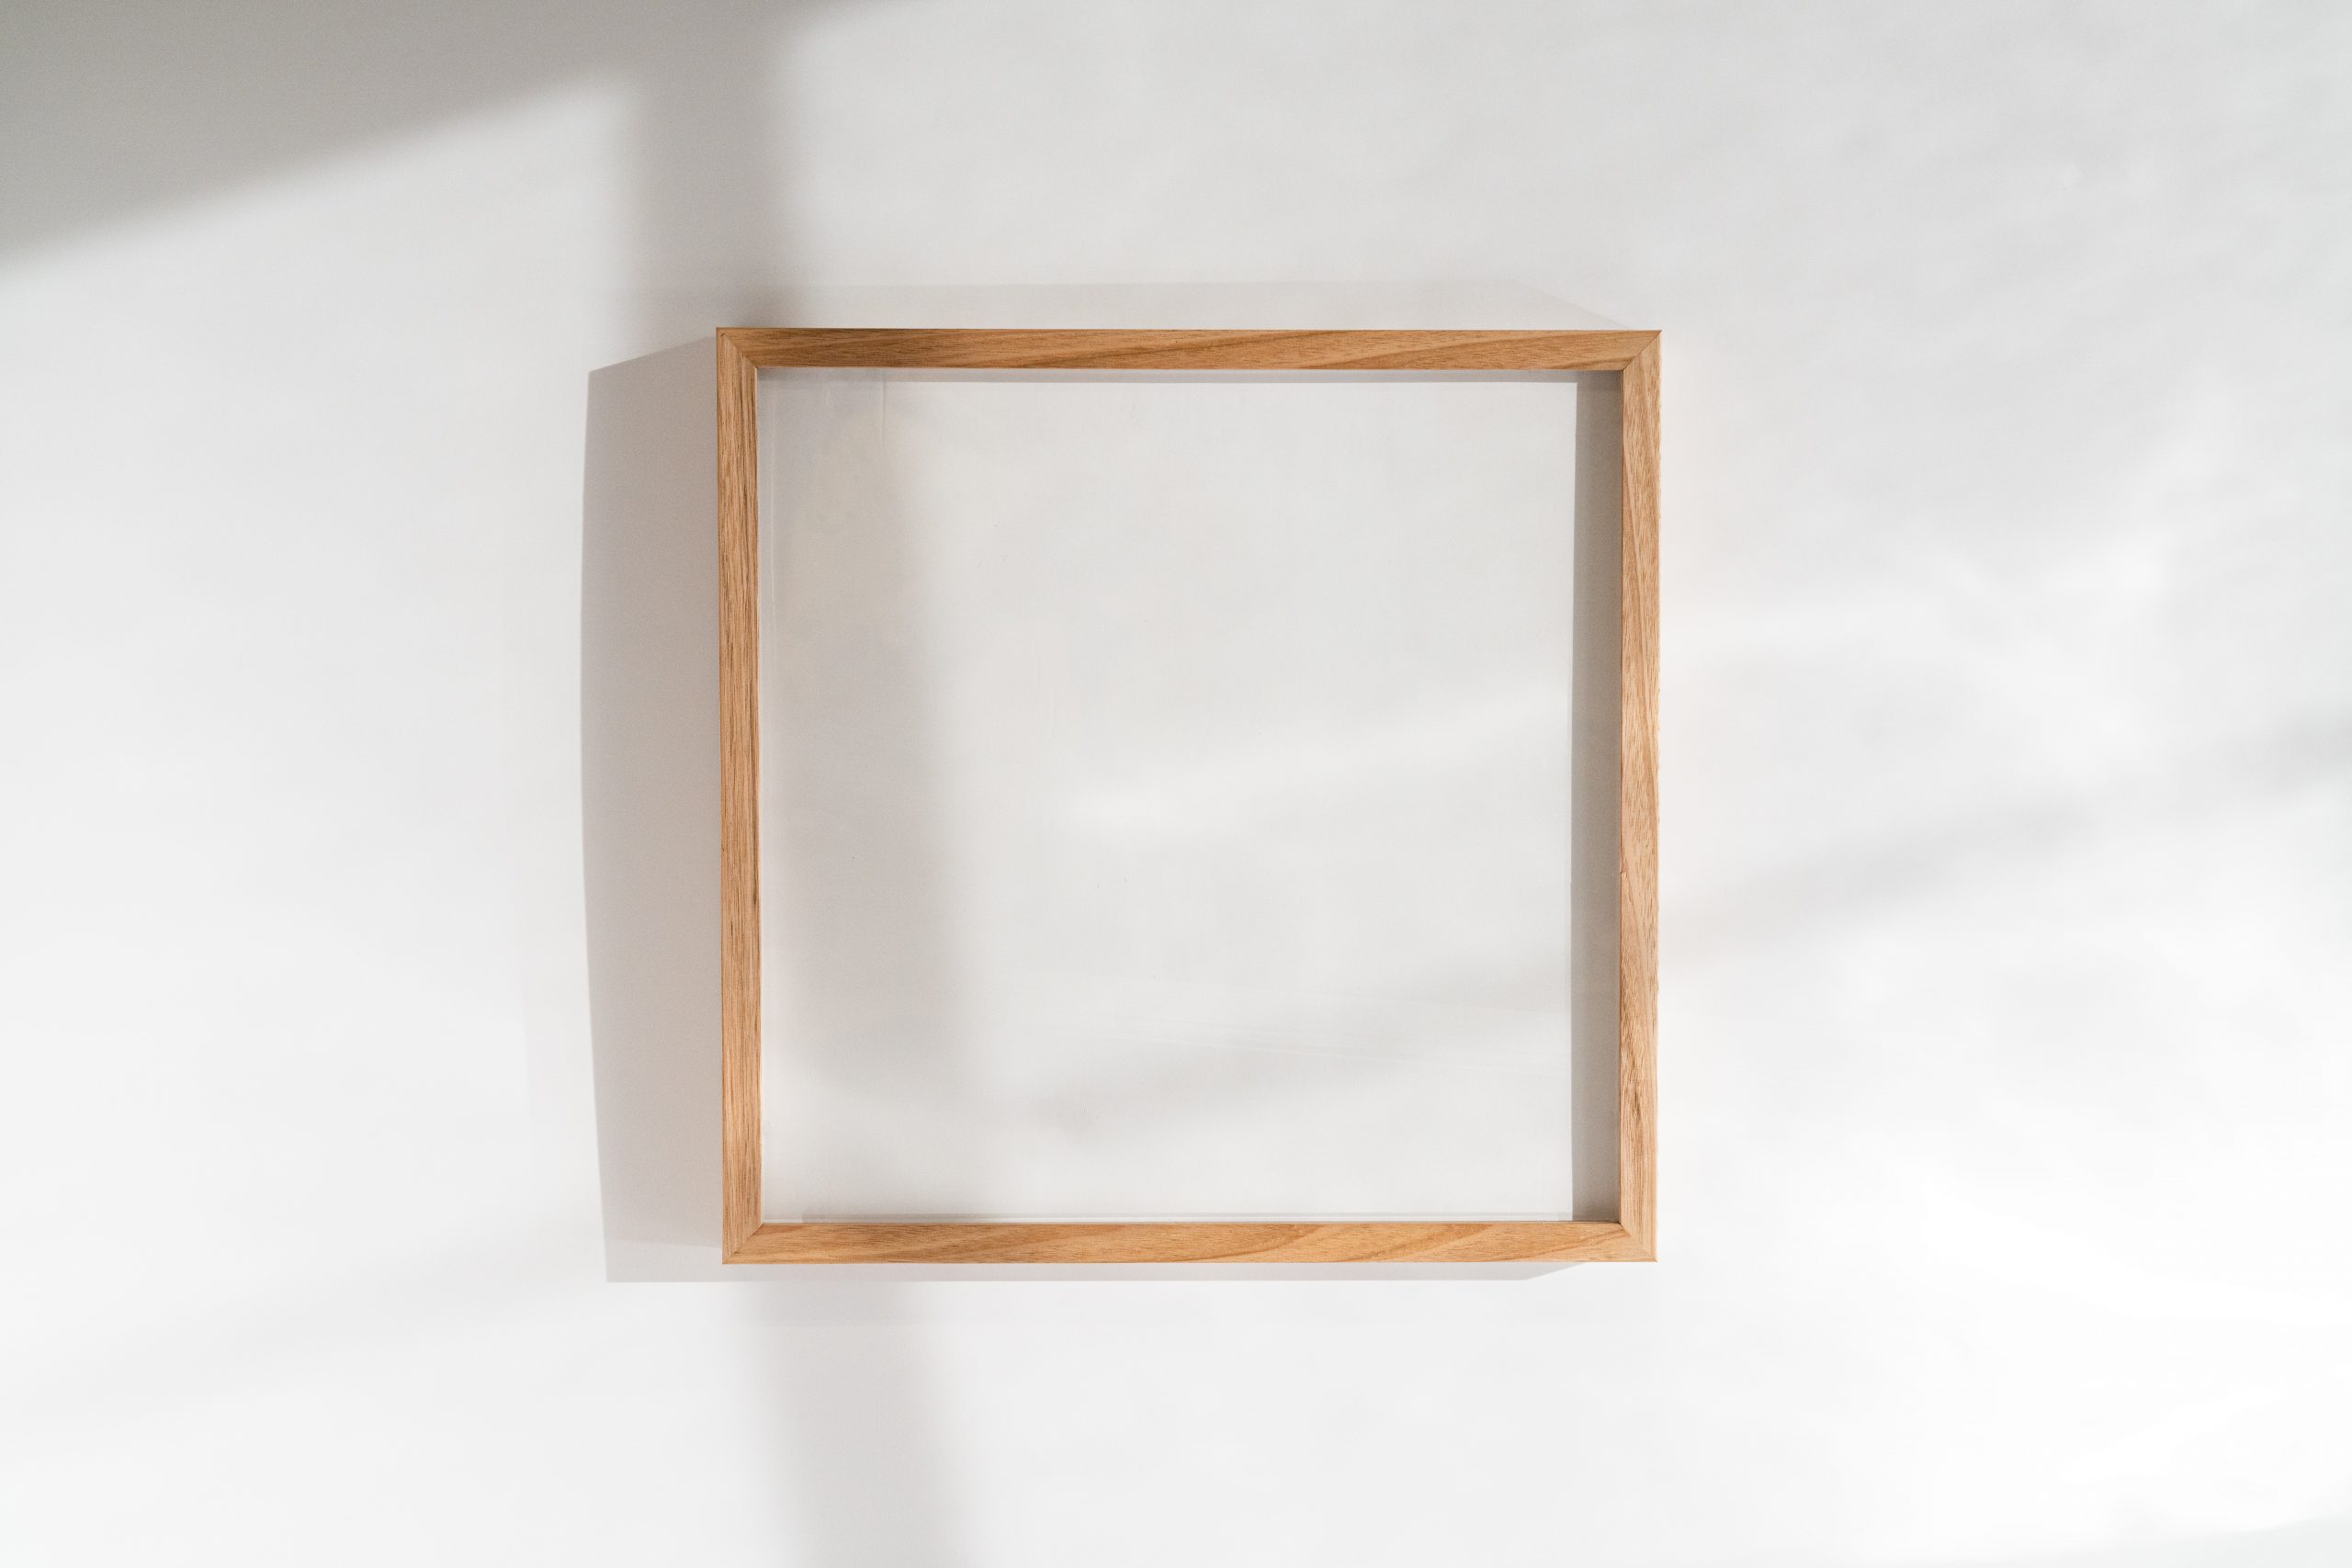 Square Oak Picture Frame on a blank white wall